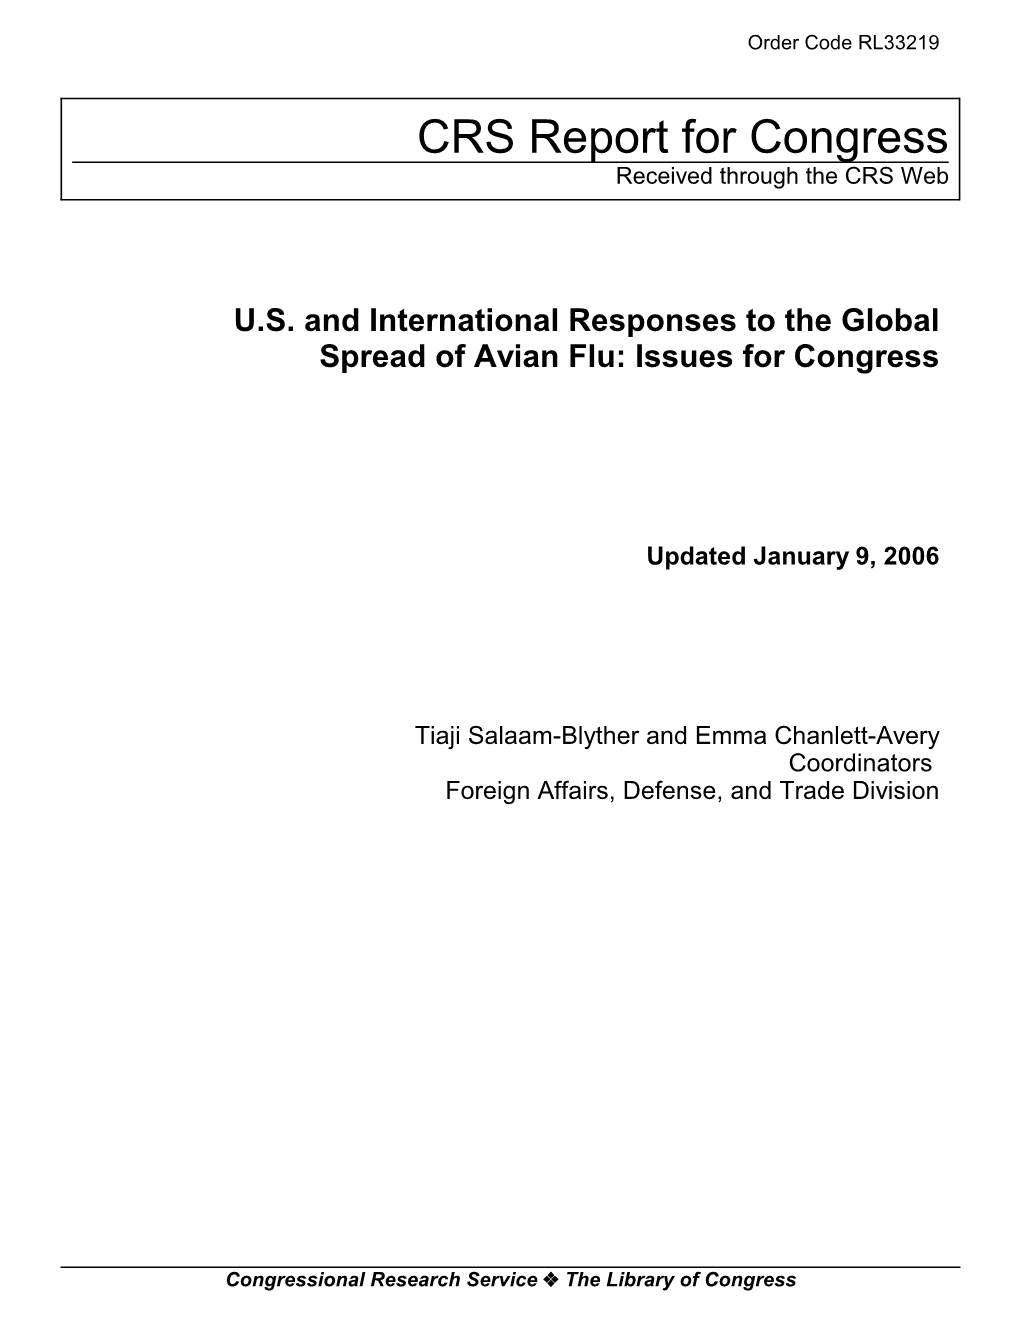 US and International Responses to the Global